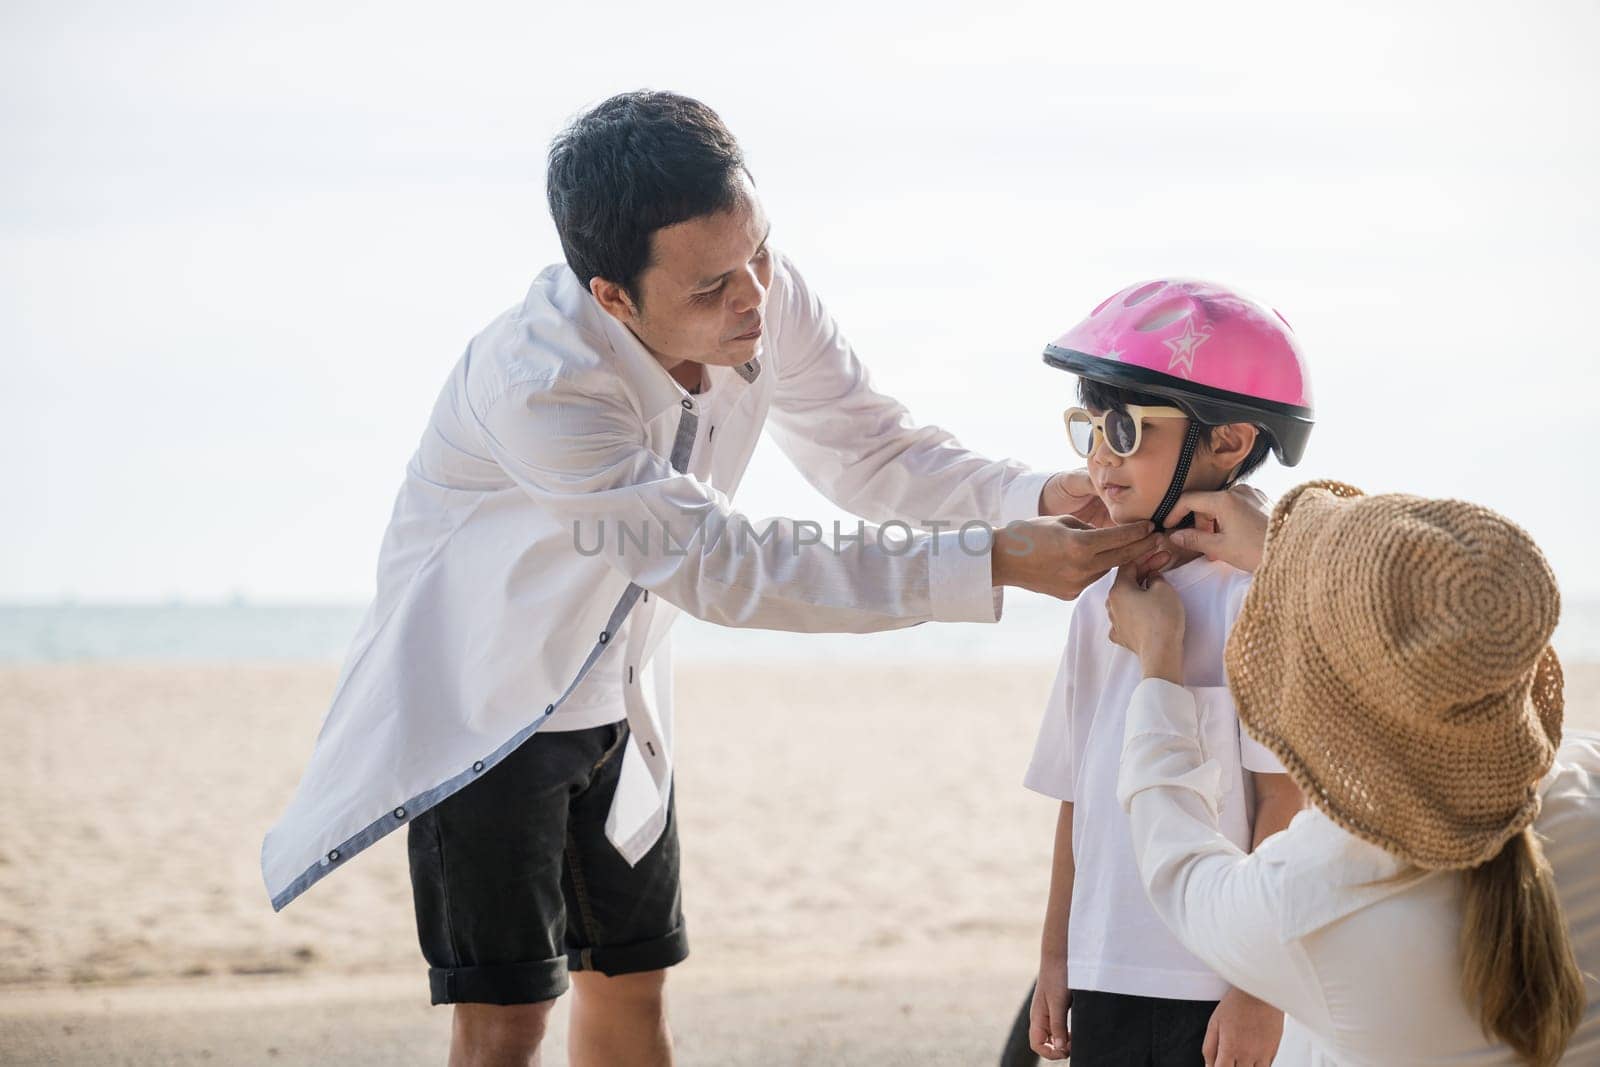 A beach travel concept unfolds, Father with a safety helmet teaches his cheerful son the balance and freedom of bicycle riding a heartwarming tourism day filled with family joy.